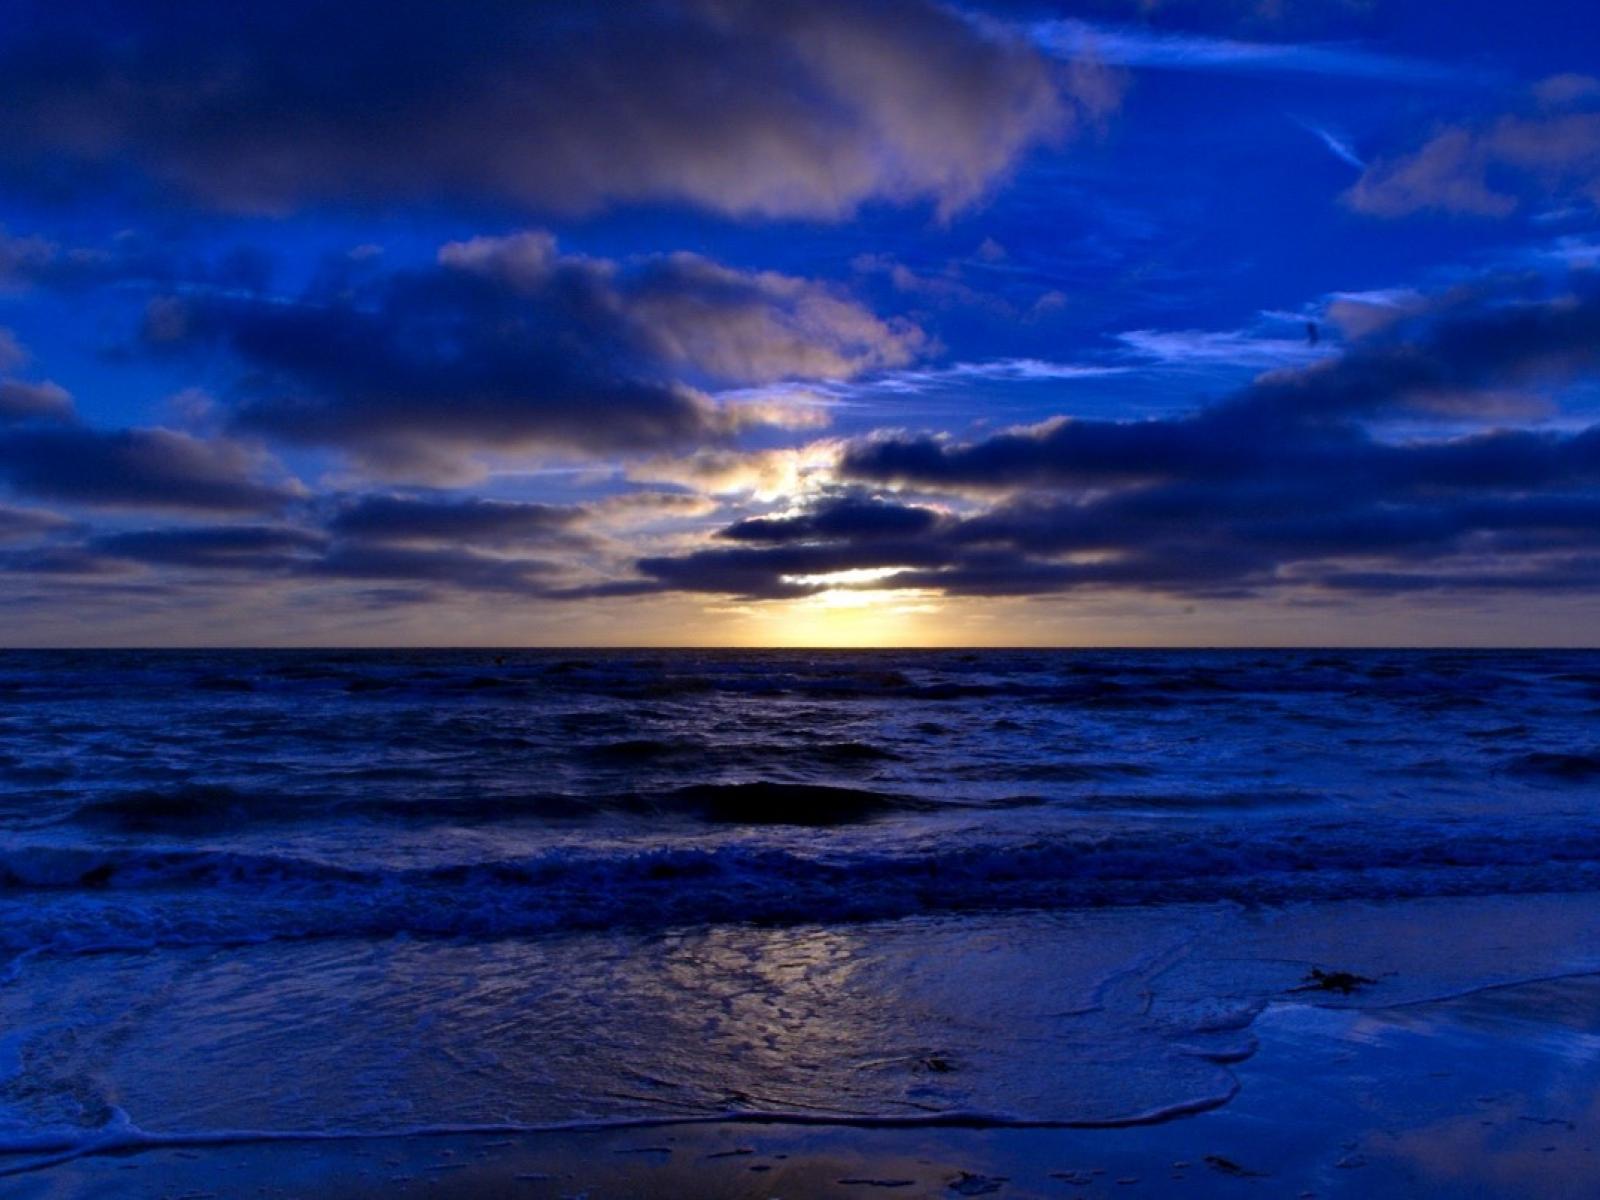 A deep blue hued sunset image above a beach, with the sun setting behind clouds.